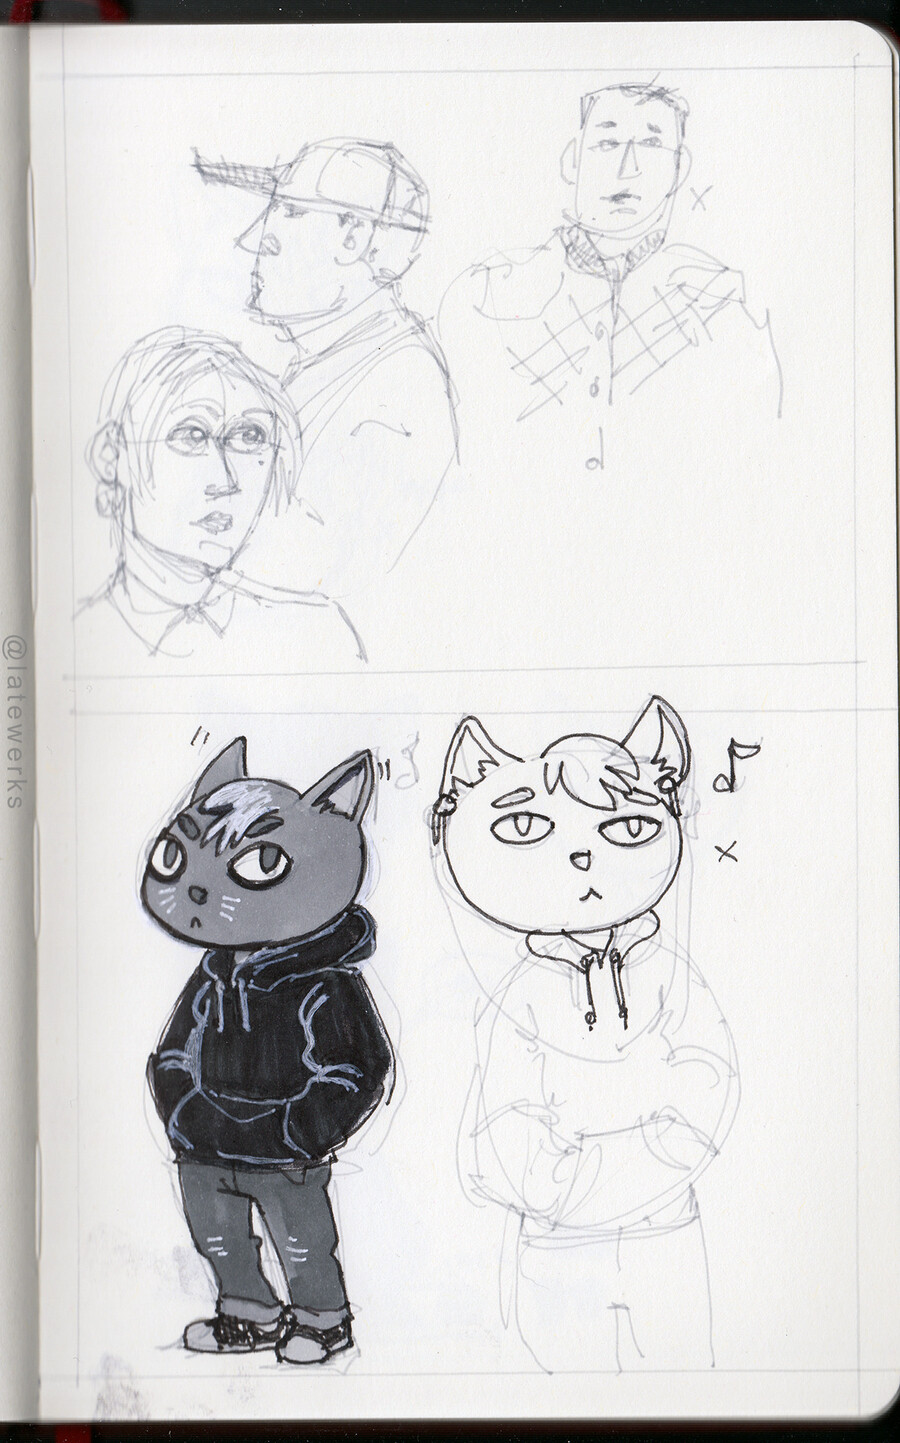 Rough character sketches, cat people